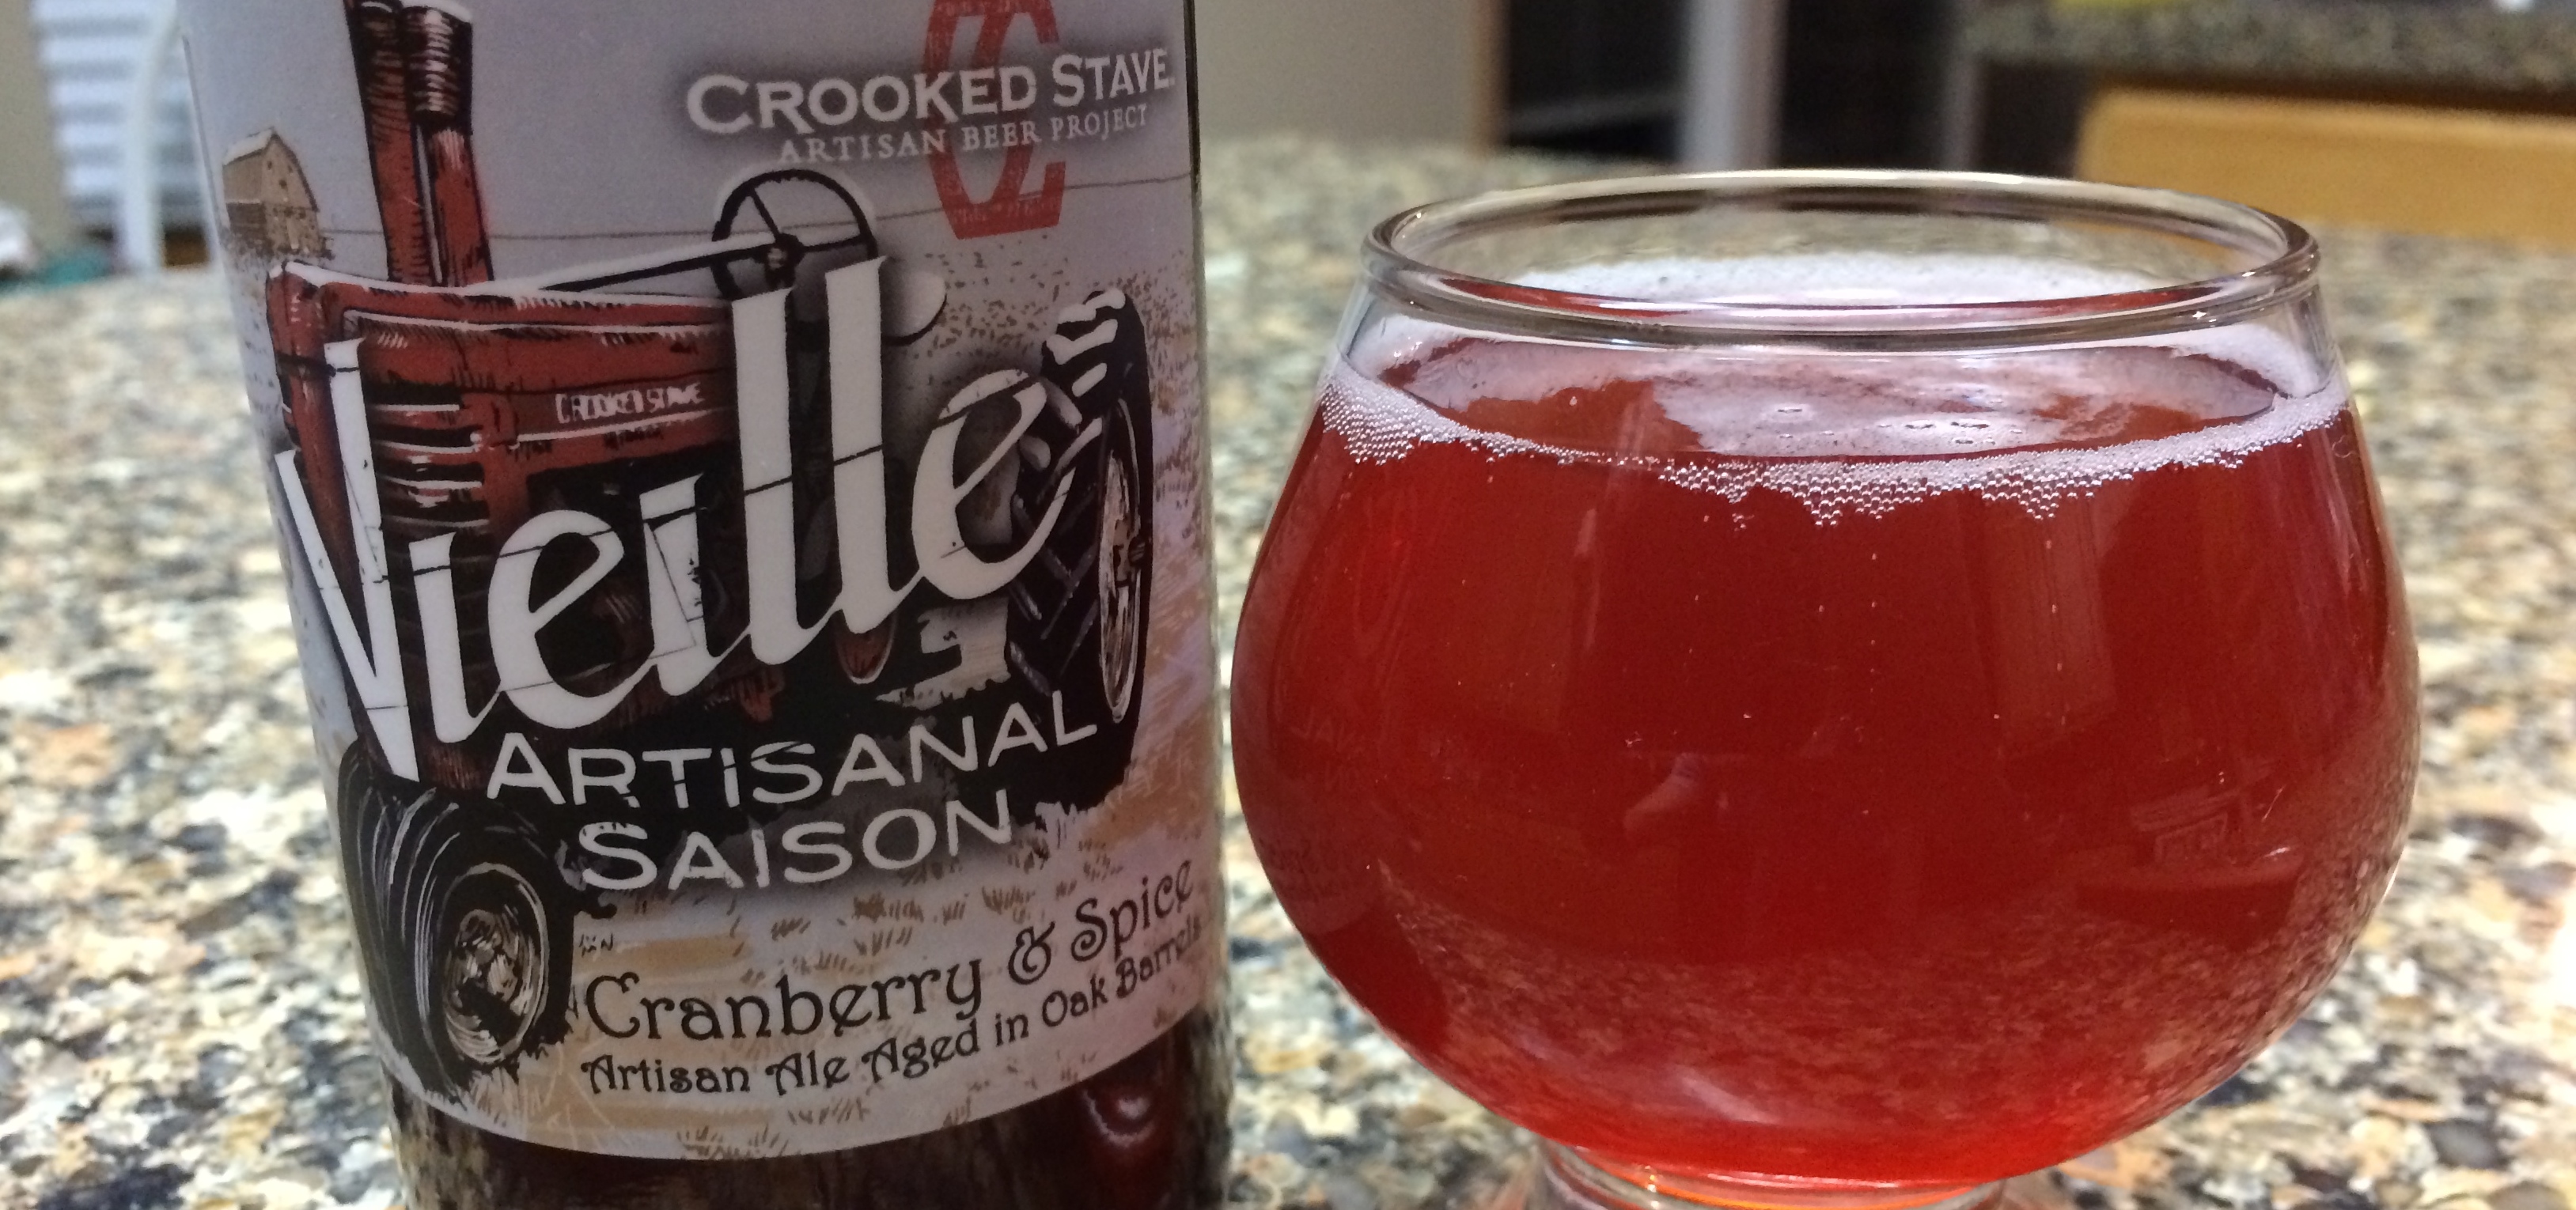 Crooked Stave- Vieille Cranberry and Spice